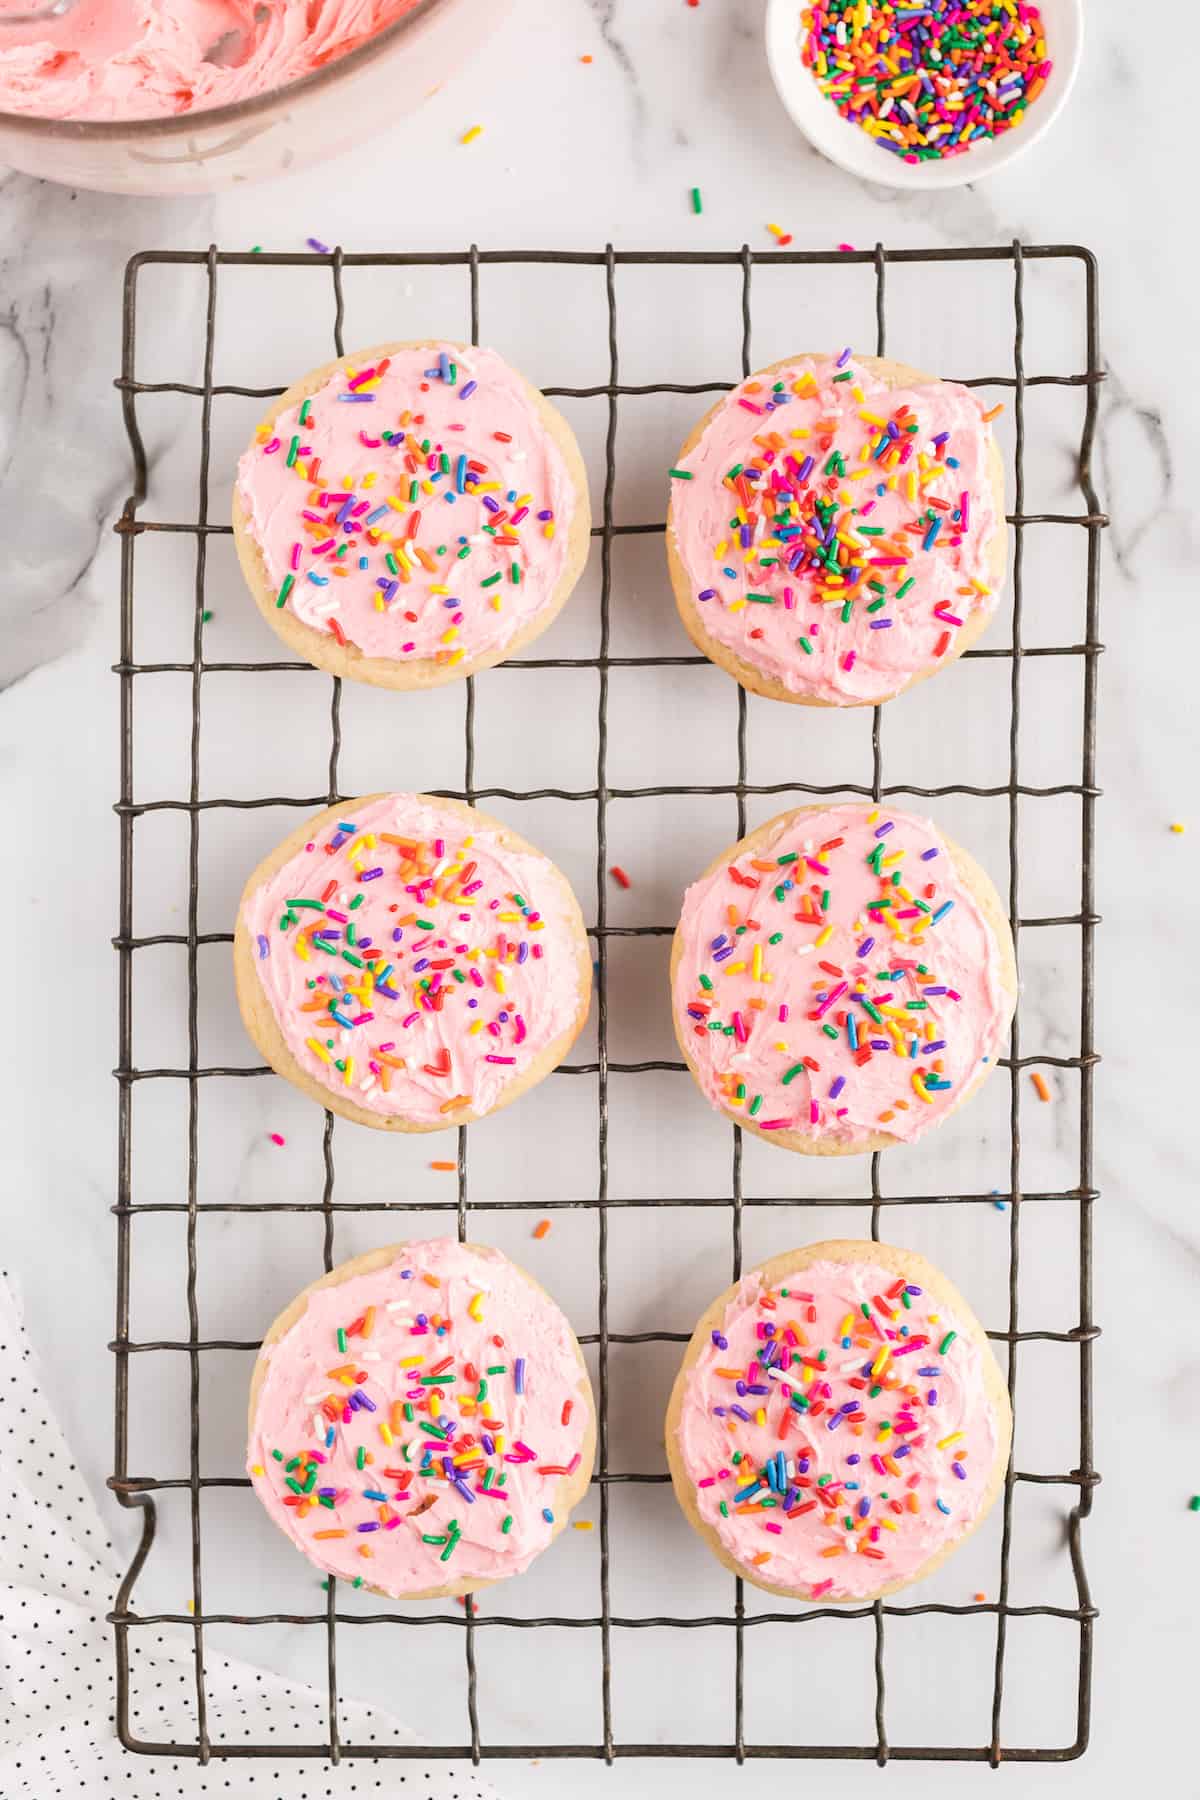 6 cookies with pink frosting and sprinkles on a wire cooling rack